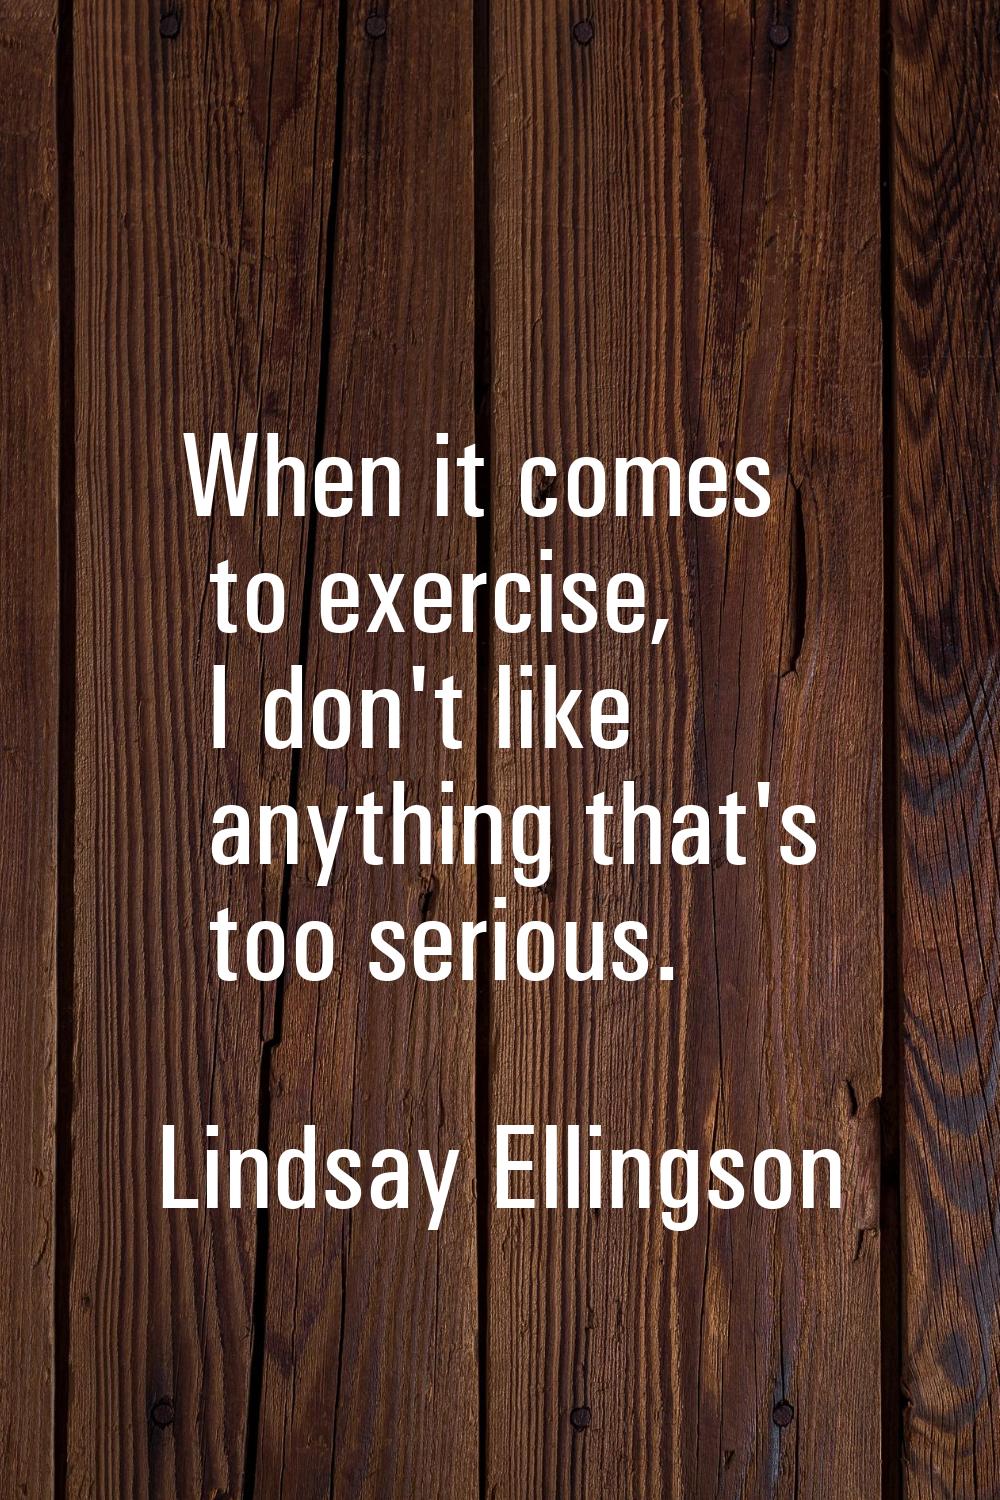 When it comes to exercise, I don't like anything that's too serious.